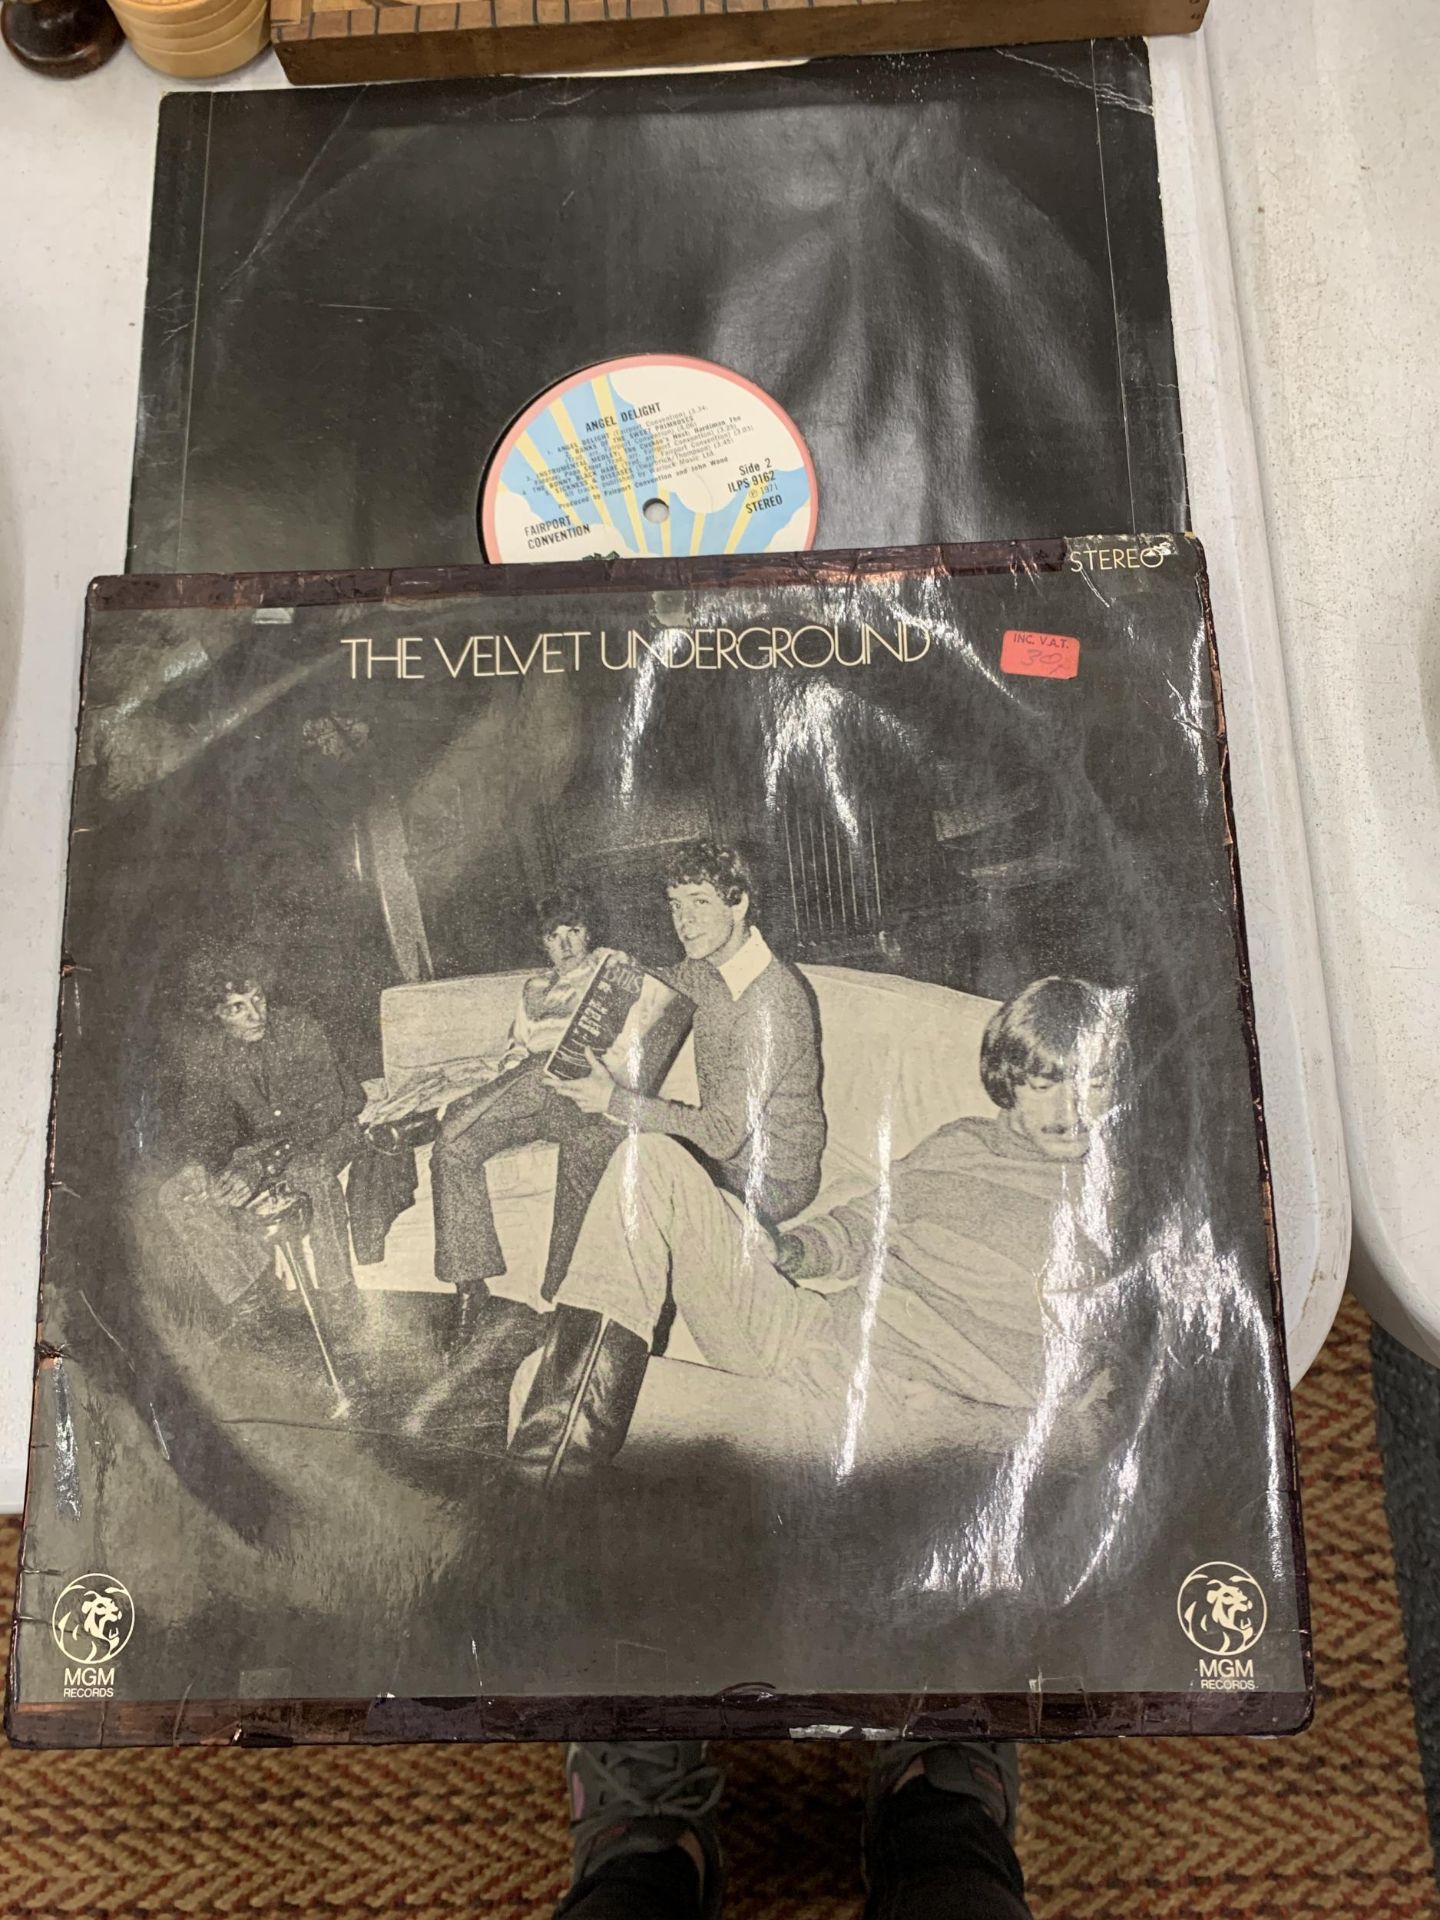 A VELVET UNDERGROUND LP AND A FAIRPORT CONVENTION LP, 'ANGEL DELIGHT' - NO COVER